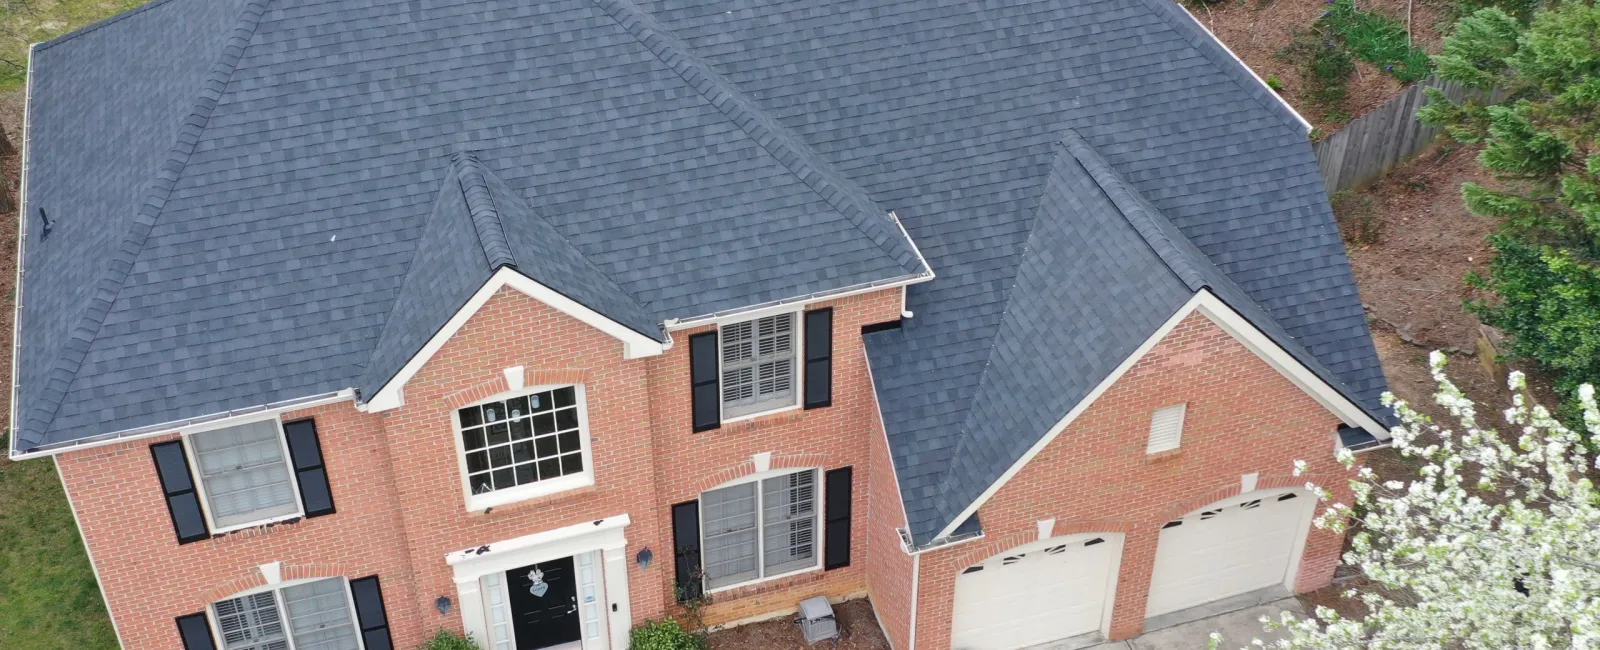 What to Look for in a Roof When Buying a New Home